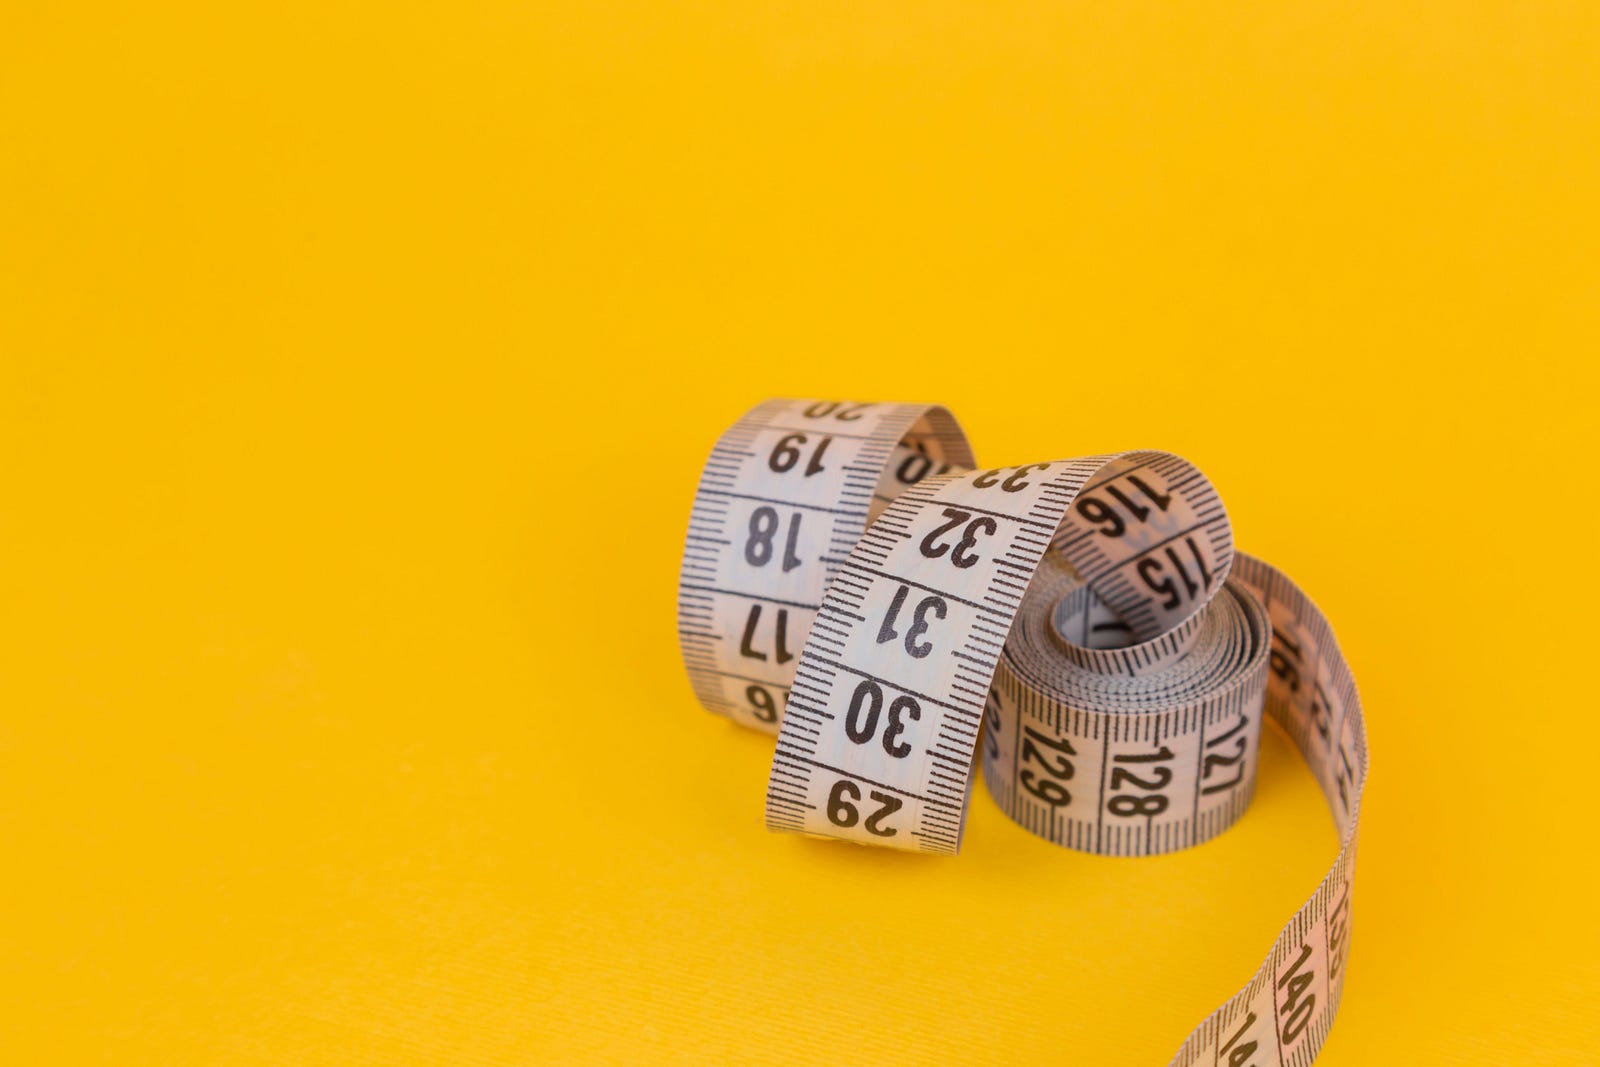 A tape measure, curled up against a yellow background. Being overweight or obese increases cancer risk. The American Cancer Society offers that excess body weight is responsible for about one out of nine (11 percent) cancer in women and one in 20 (five percent) in men. Too much weight is linked with approximately seven percent of all cancer-related deaths.